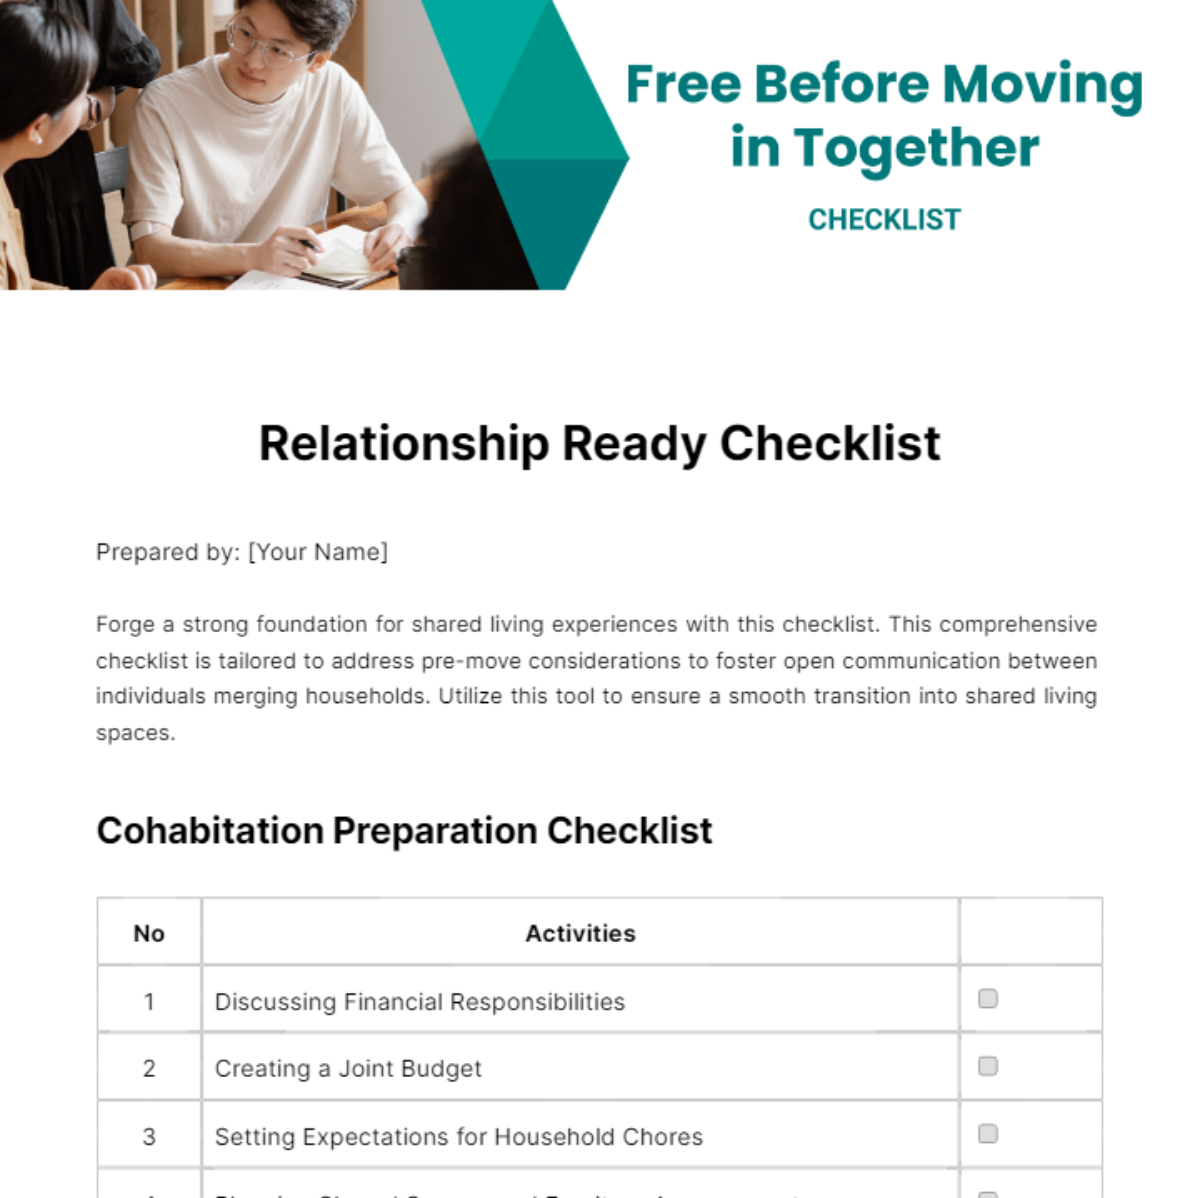 Before Moving in Together Checklist Template